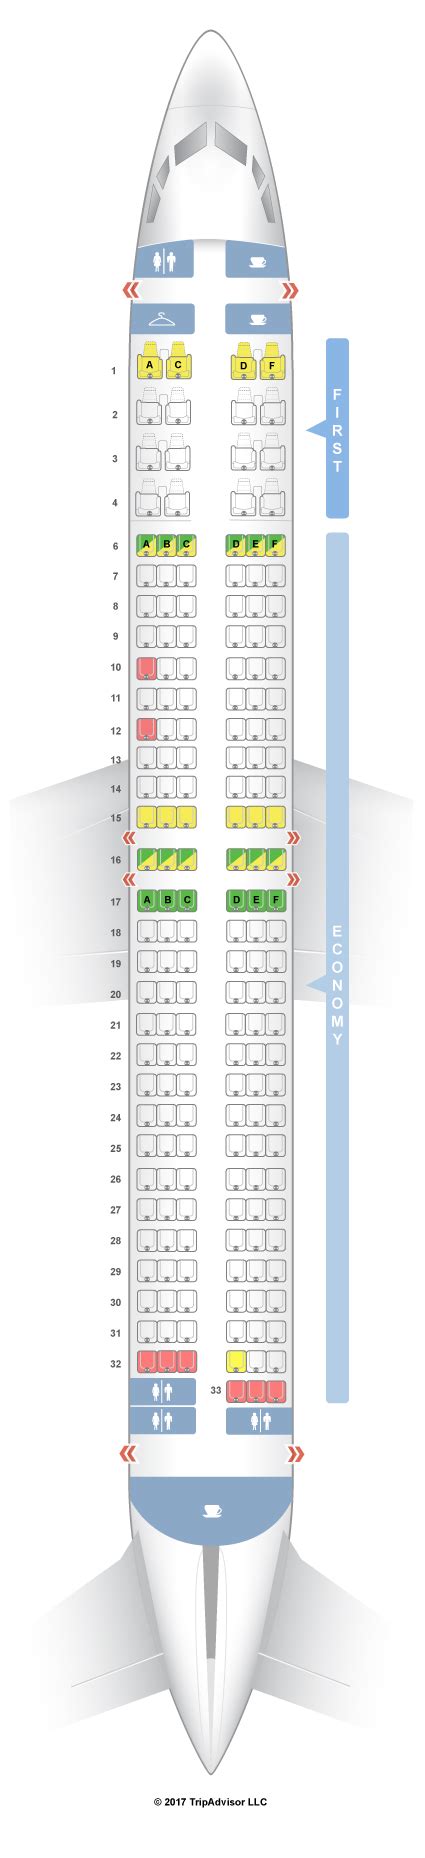 Alaska 737 900 seat map. This is a 4.5h hour flight so the slim seats start to get a bit uncomfortable after a while, but otherwise no complaints. The seats behind the exit rows have 1 inch less legroom t 